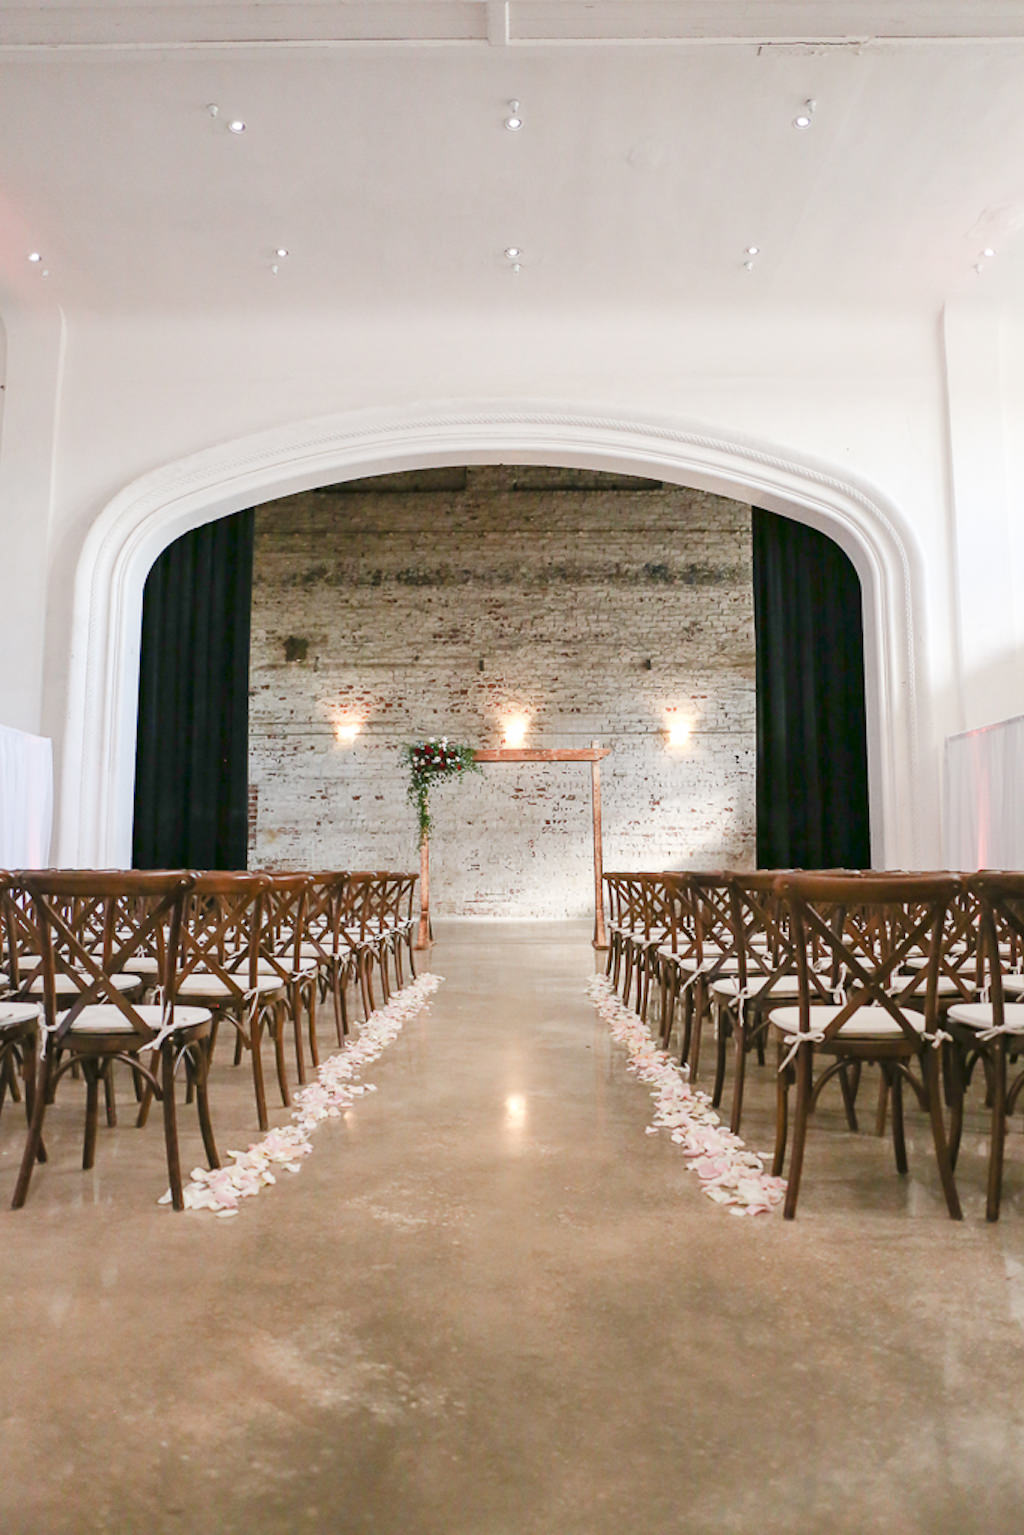 Industrial Elegant Wedding Ceremony Decor, White Brick Wall Backdrop, Wooden Chiavari Chairs, Blush Floral Petal Aisle, Wooden Arch with Greenery Accent | Tampa Wedding Photographer Lifelong Photography Studios | Tampa Wedding Planner Breezin' Weddings | Tampa Bay Wedding Venue Rialto Theatre